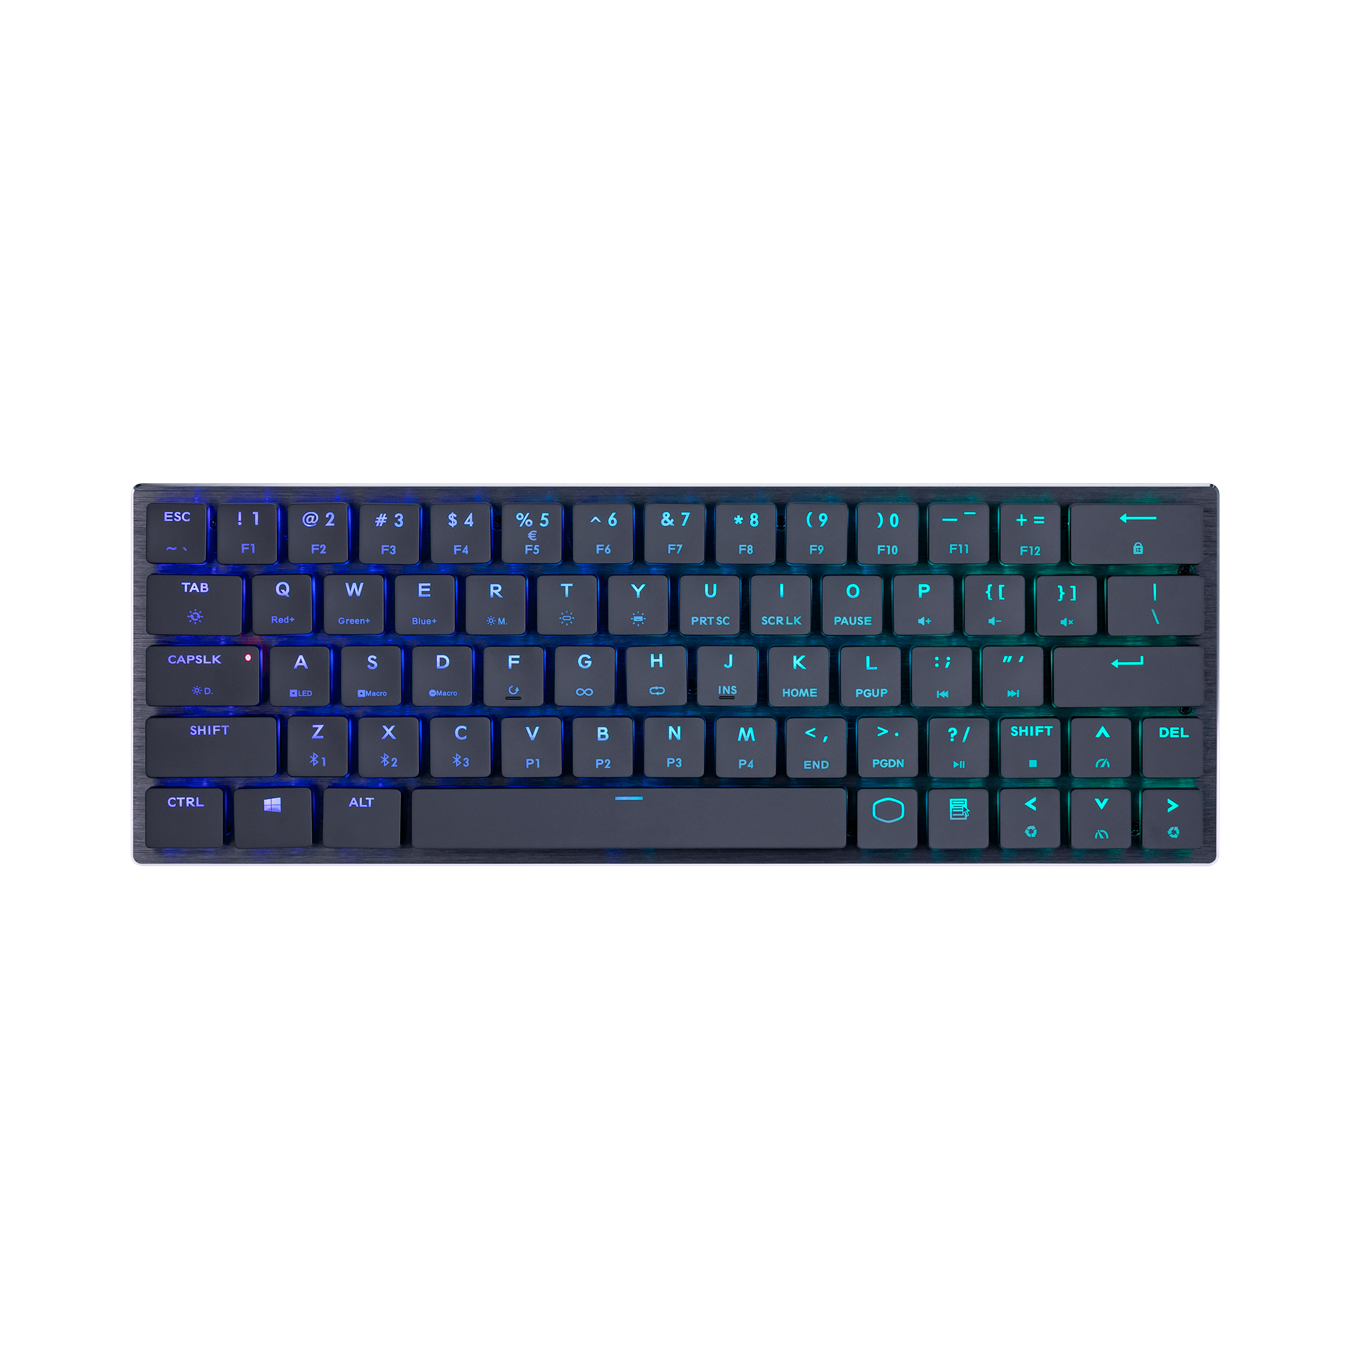 SK621 Low Profile Wireless Mechanical Keyboard - sports a bold new look for mechanical keyboards with new Cherry MX Low Profile switches